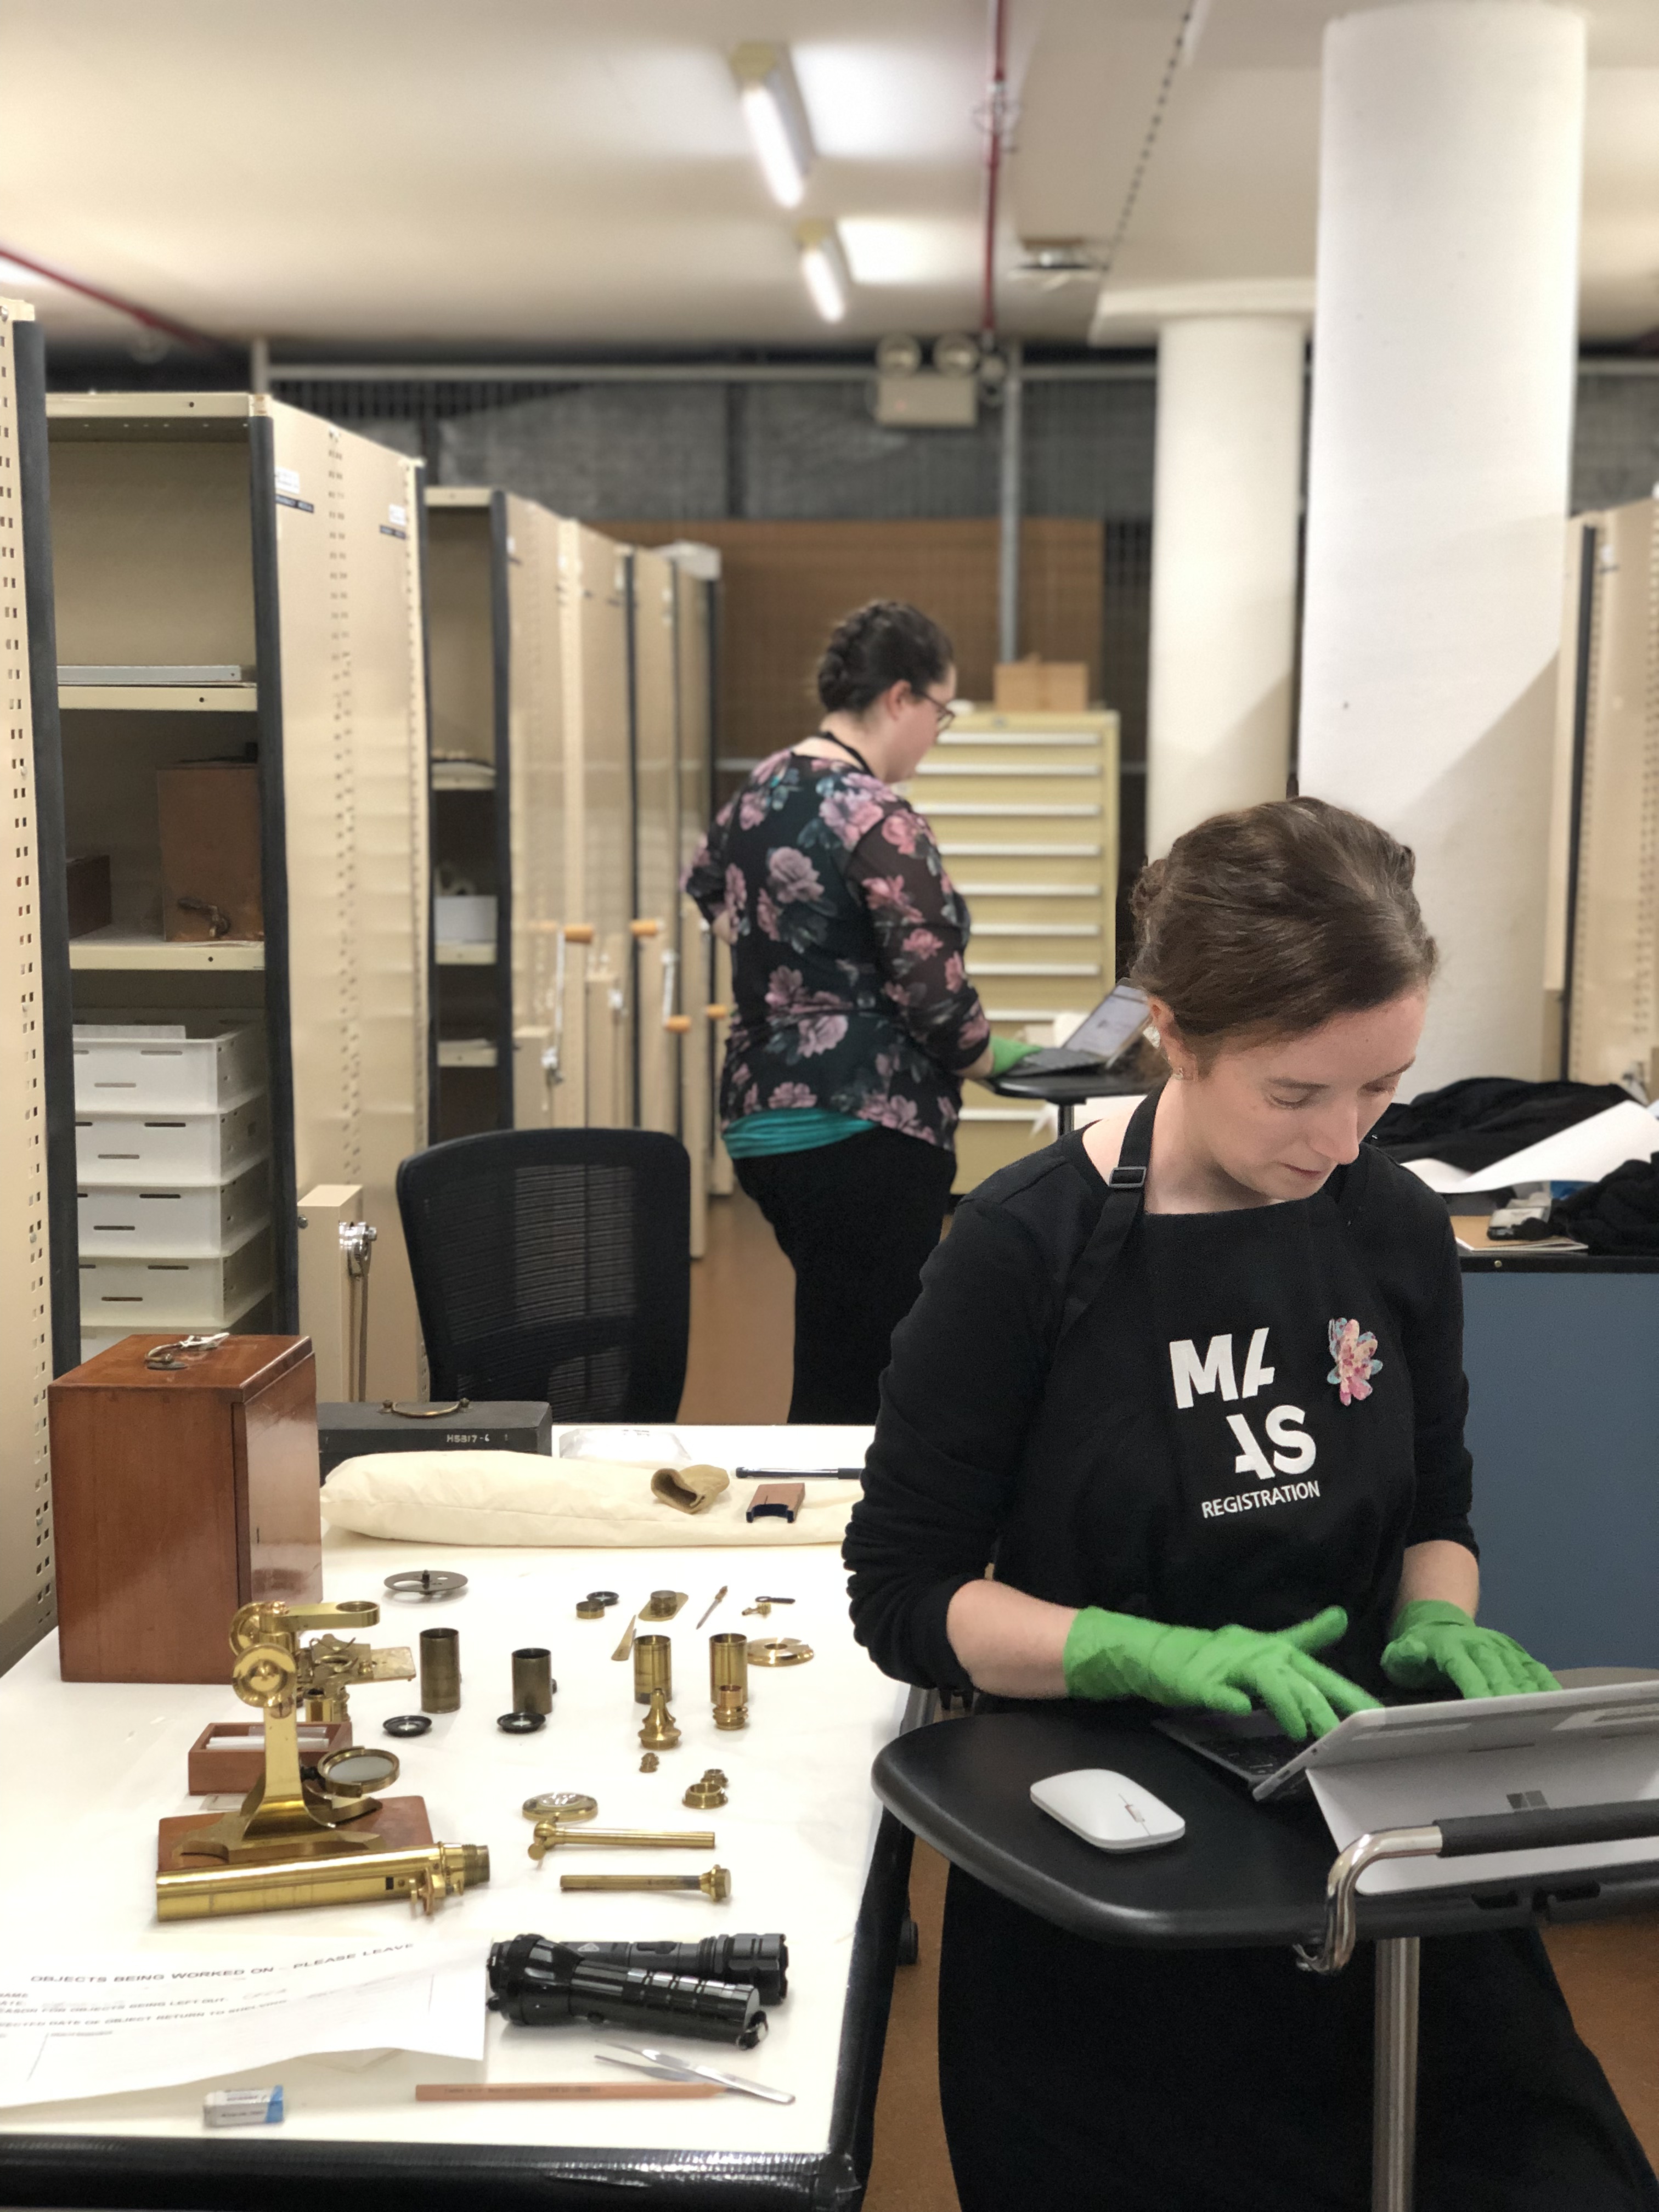 Conservator Megan Hall and Registrar Kate Clancy from the Assessment Team at work in the collection store entering information into the EMu collection database on their laptops.